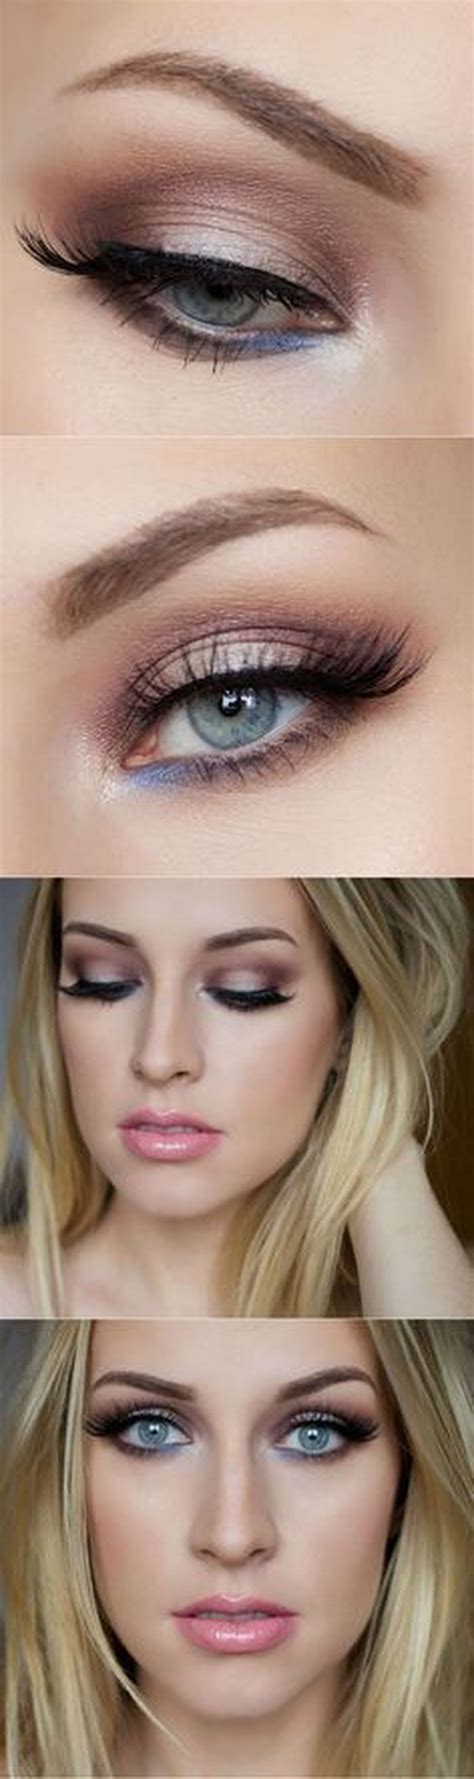 30 Natural And Simple Prom Makeup Ideas For Blondes Blue Eye Makeup